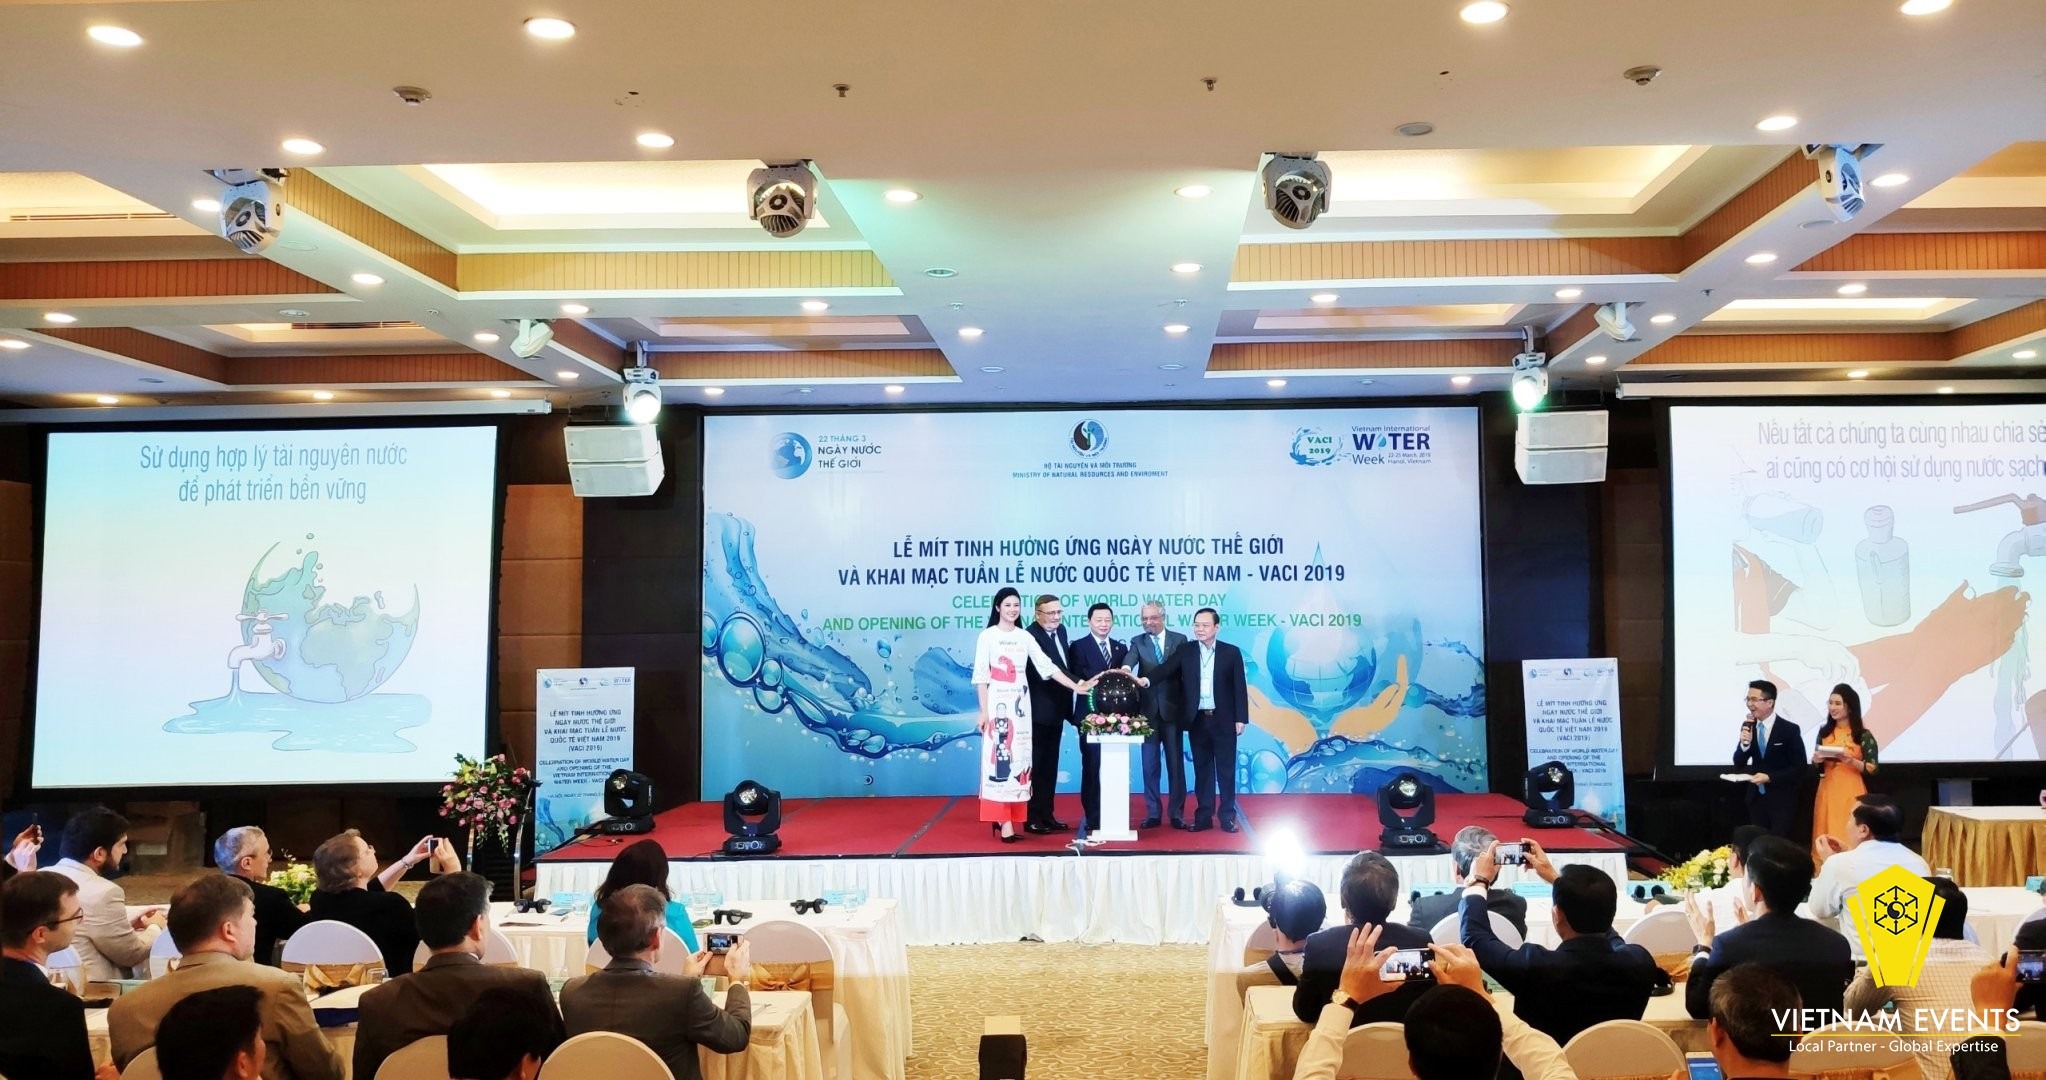 Celebration of World Water Day and Opening of the Vietnam International Water Week 2019